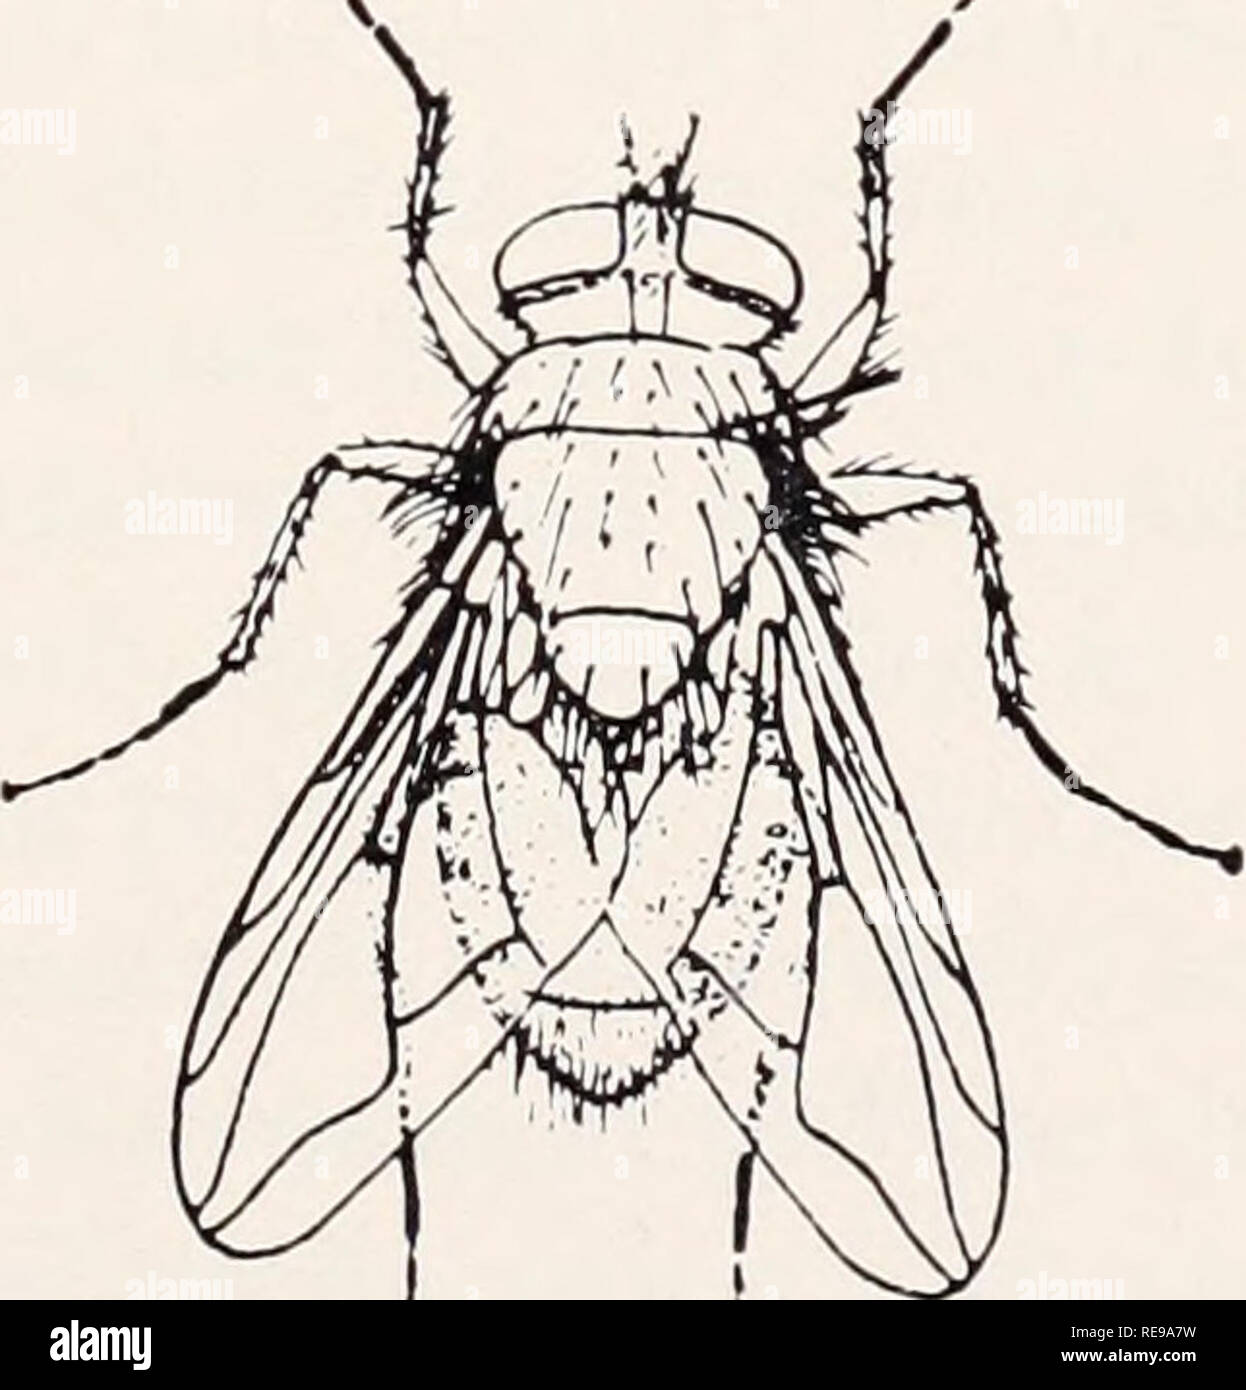 Control of household insects and related pests. Household pests; Insect  pests. Common Housefly, Musca domestica Linn. Common size, adult: Stable Fly,  Stomoxys calcitrans (Linn.) Common size, adult:. I Black Blowfly, Phormia